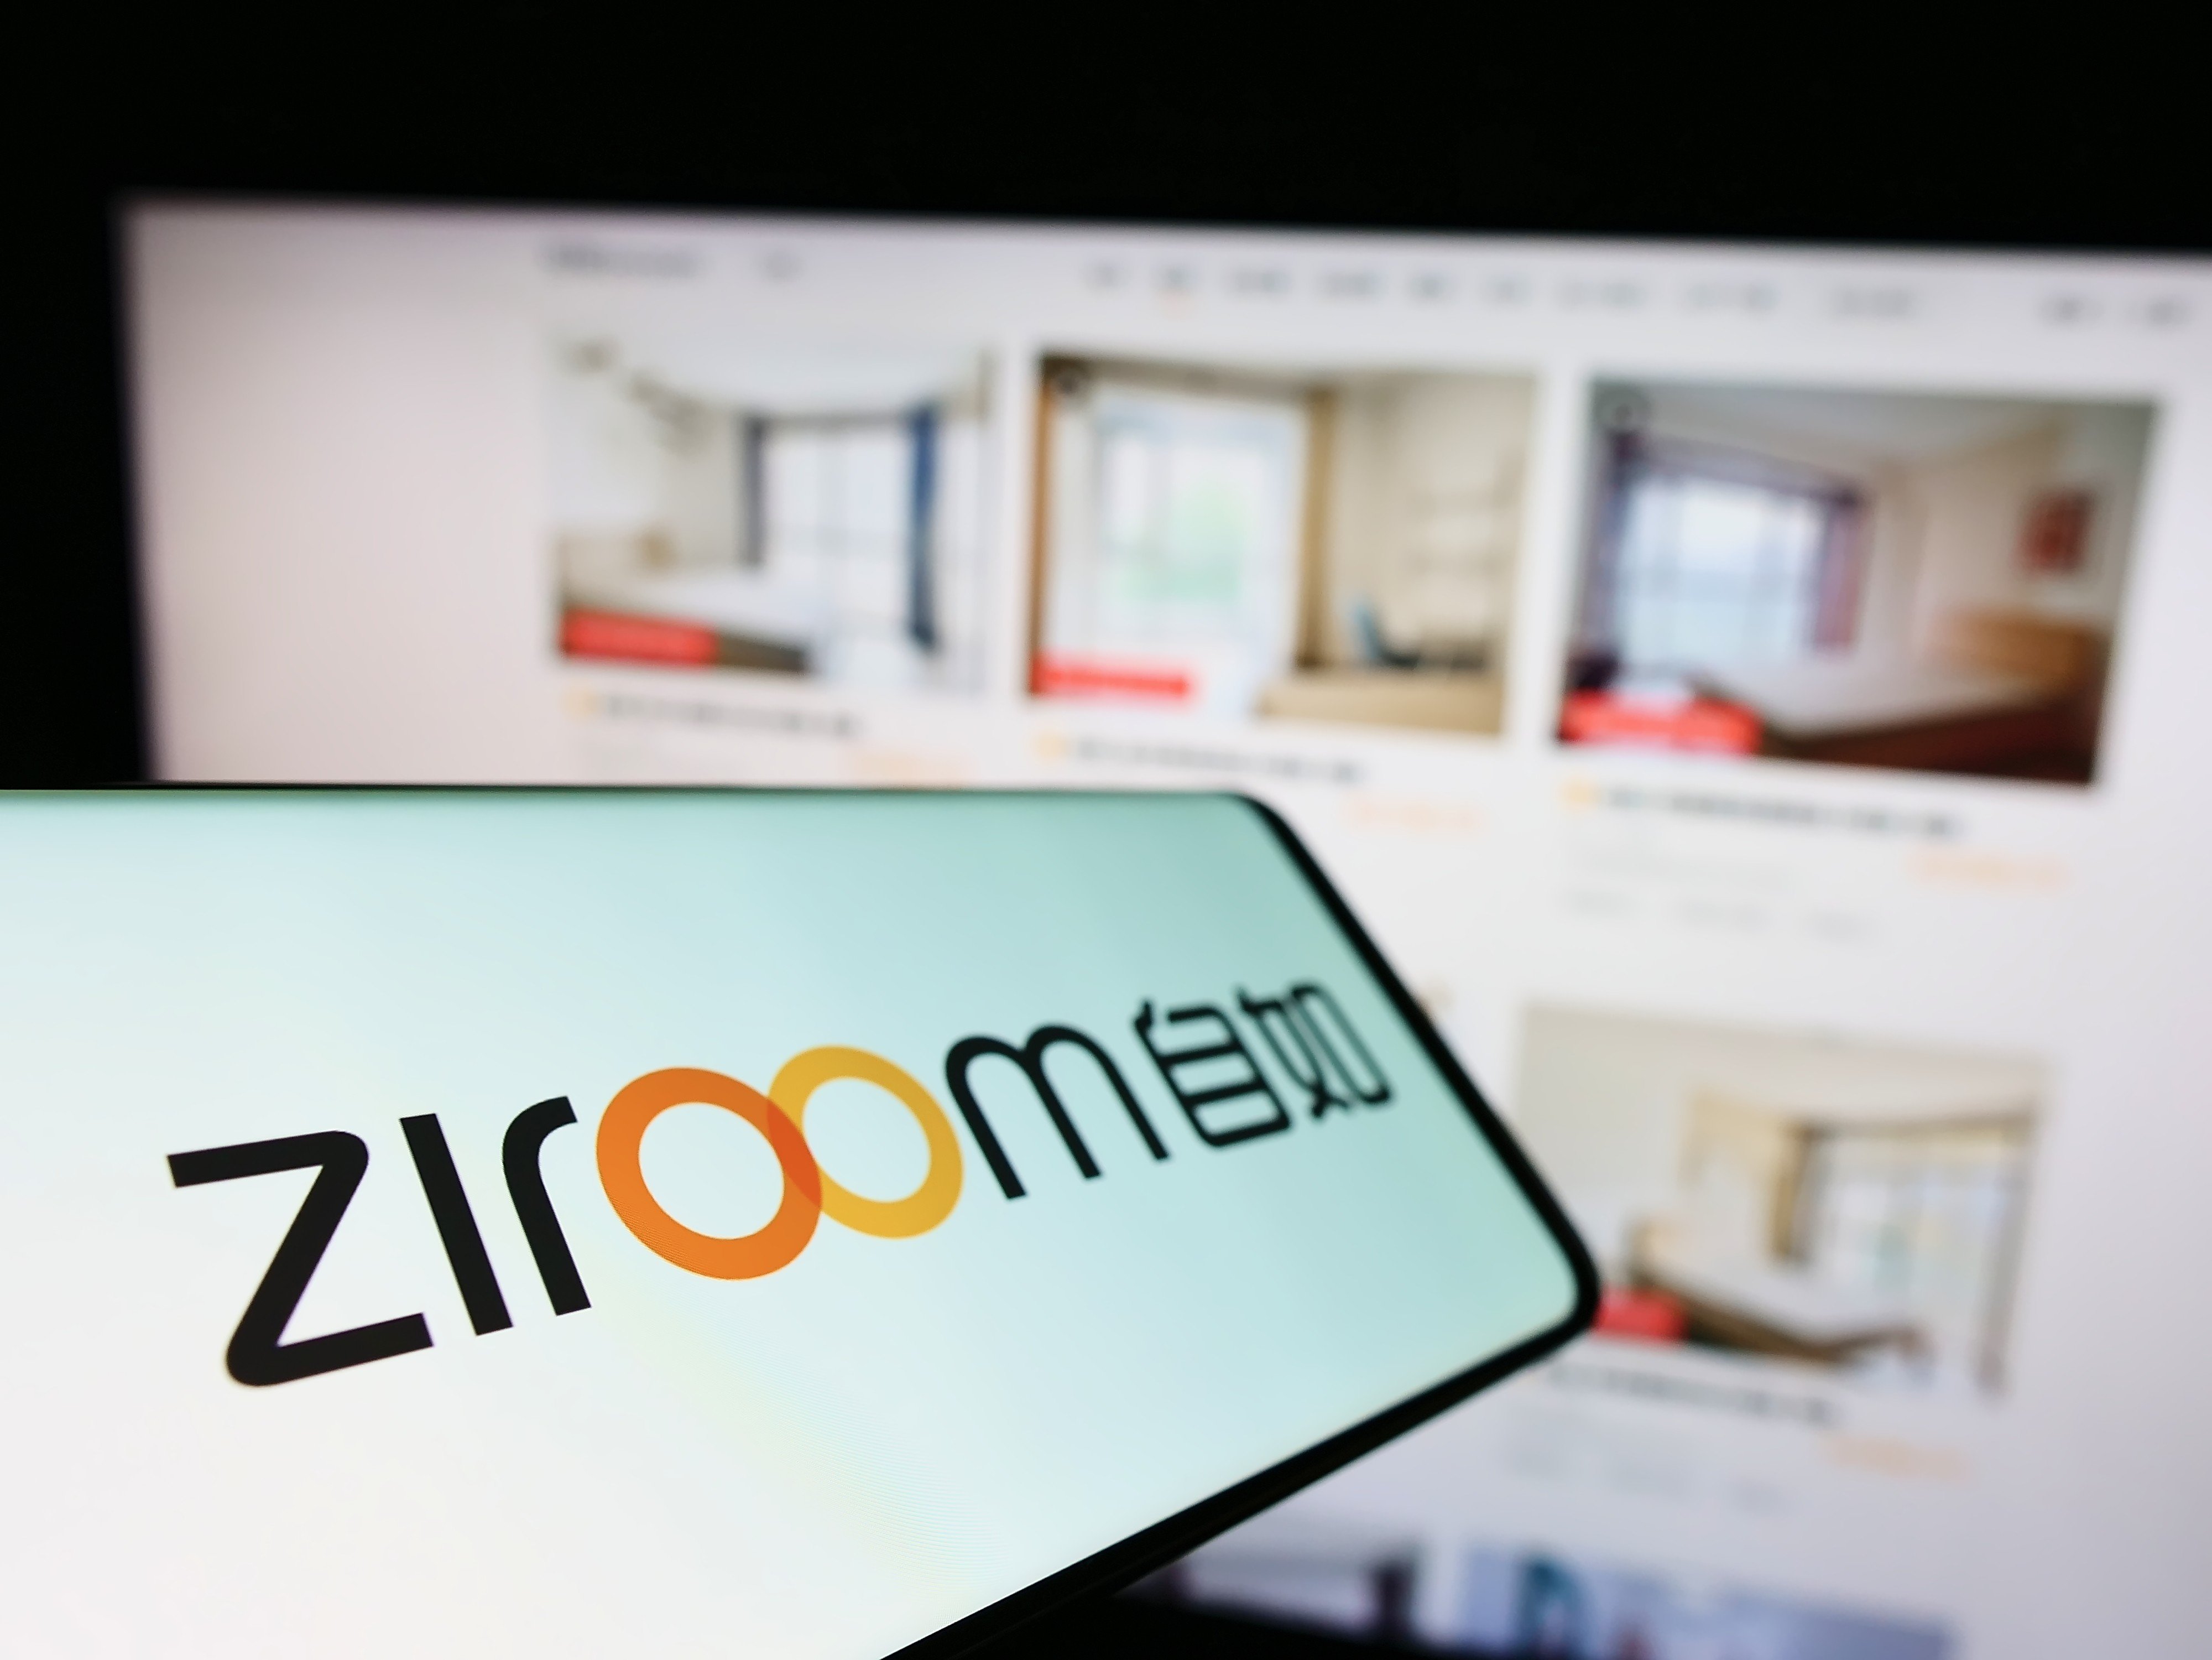 Ziroom said it manages more than a million flats across China, and has served some 5 million tenants and operated properties for nearly 500,000 owners. Photo: Shutterstock